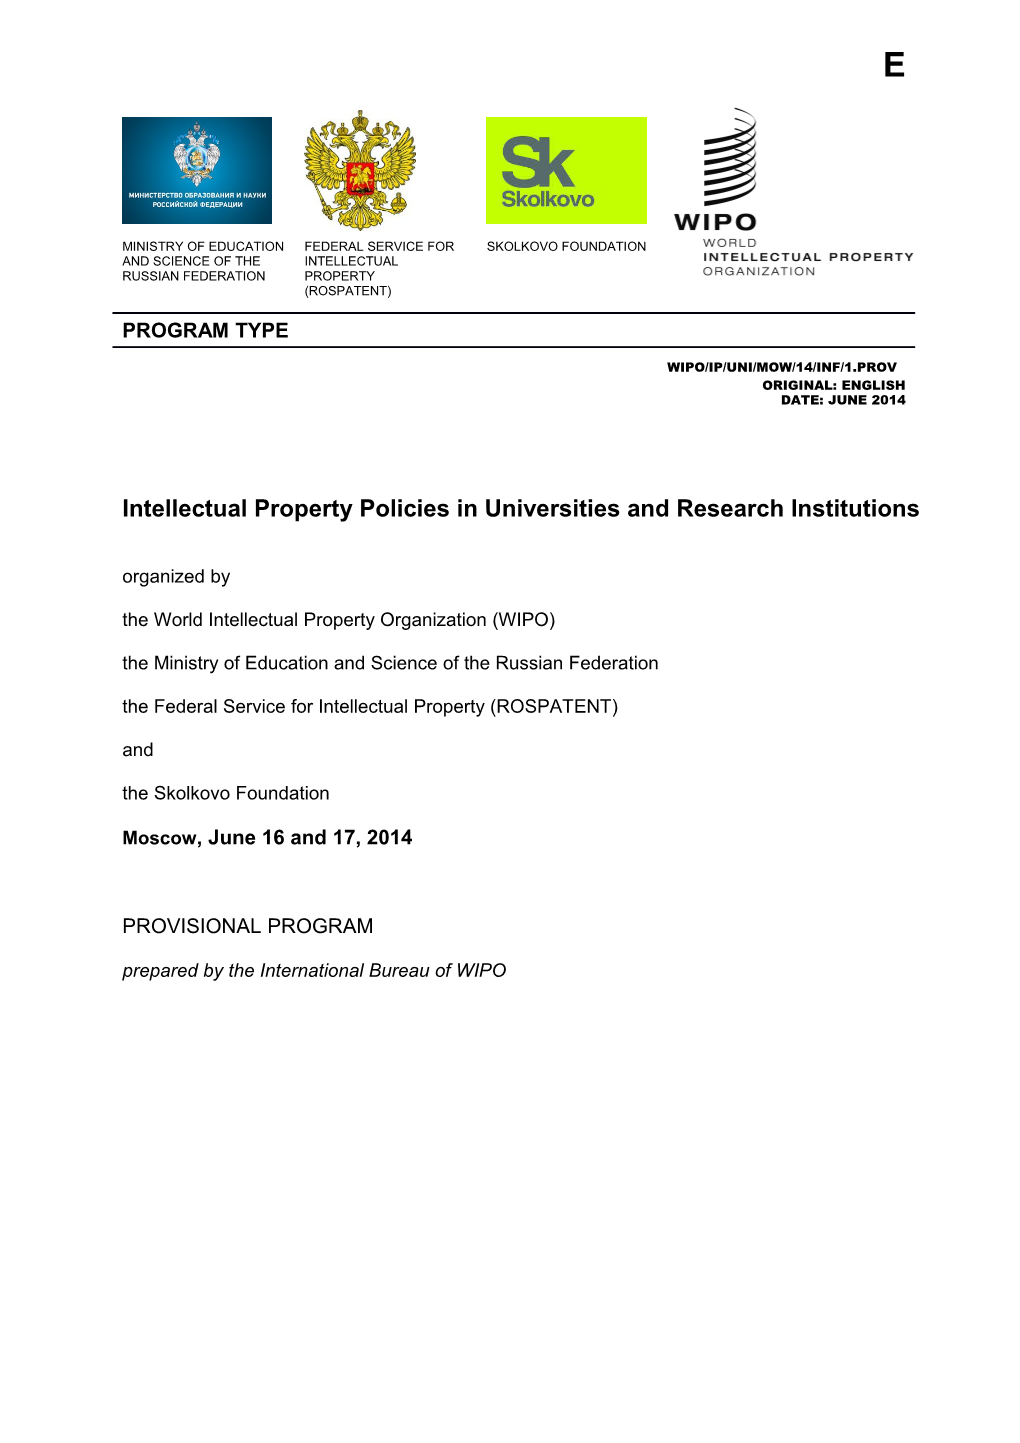 Intellectual Property Policies in Universities and Research Institutions